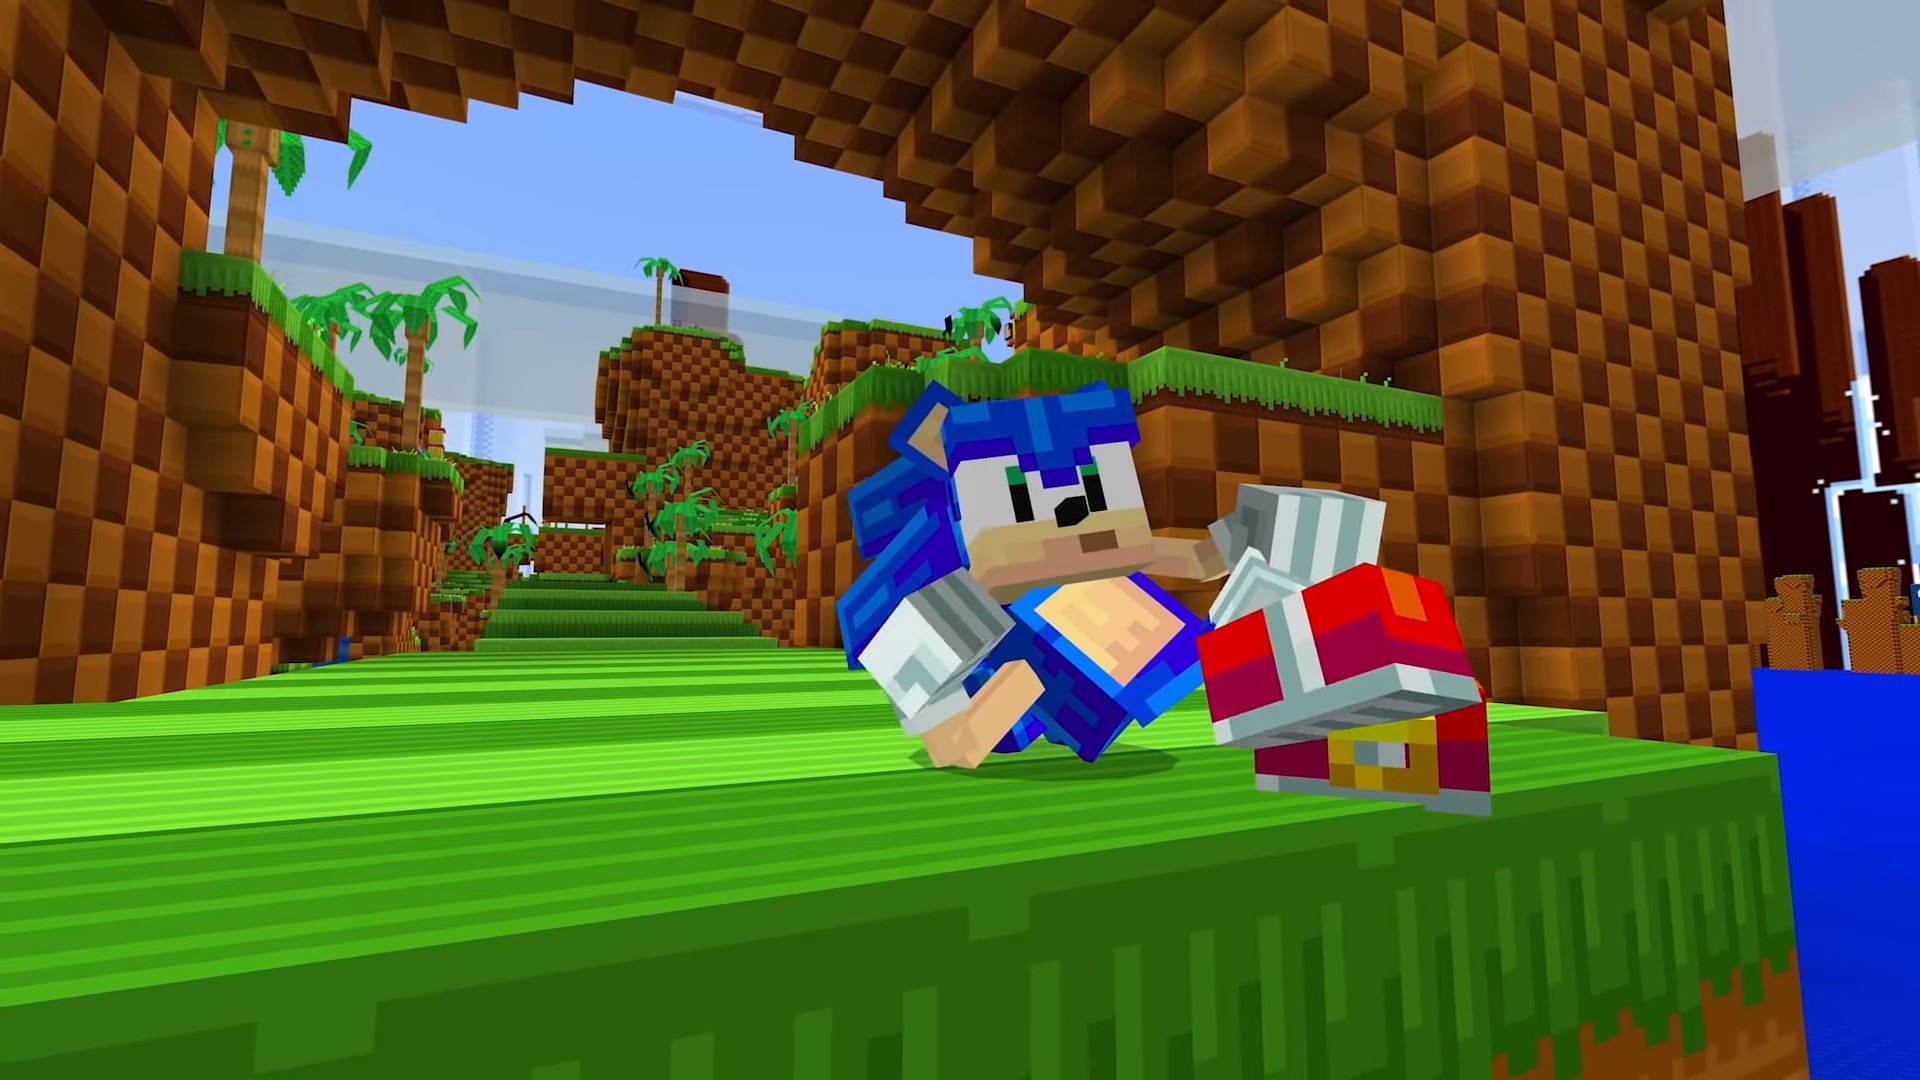 They put full Sonic levels and a Chao Garden in this Minecraft DLC